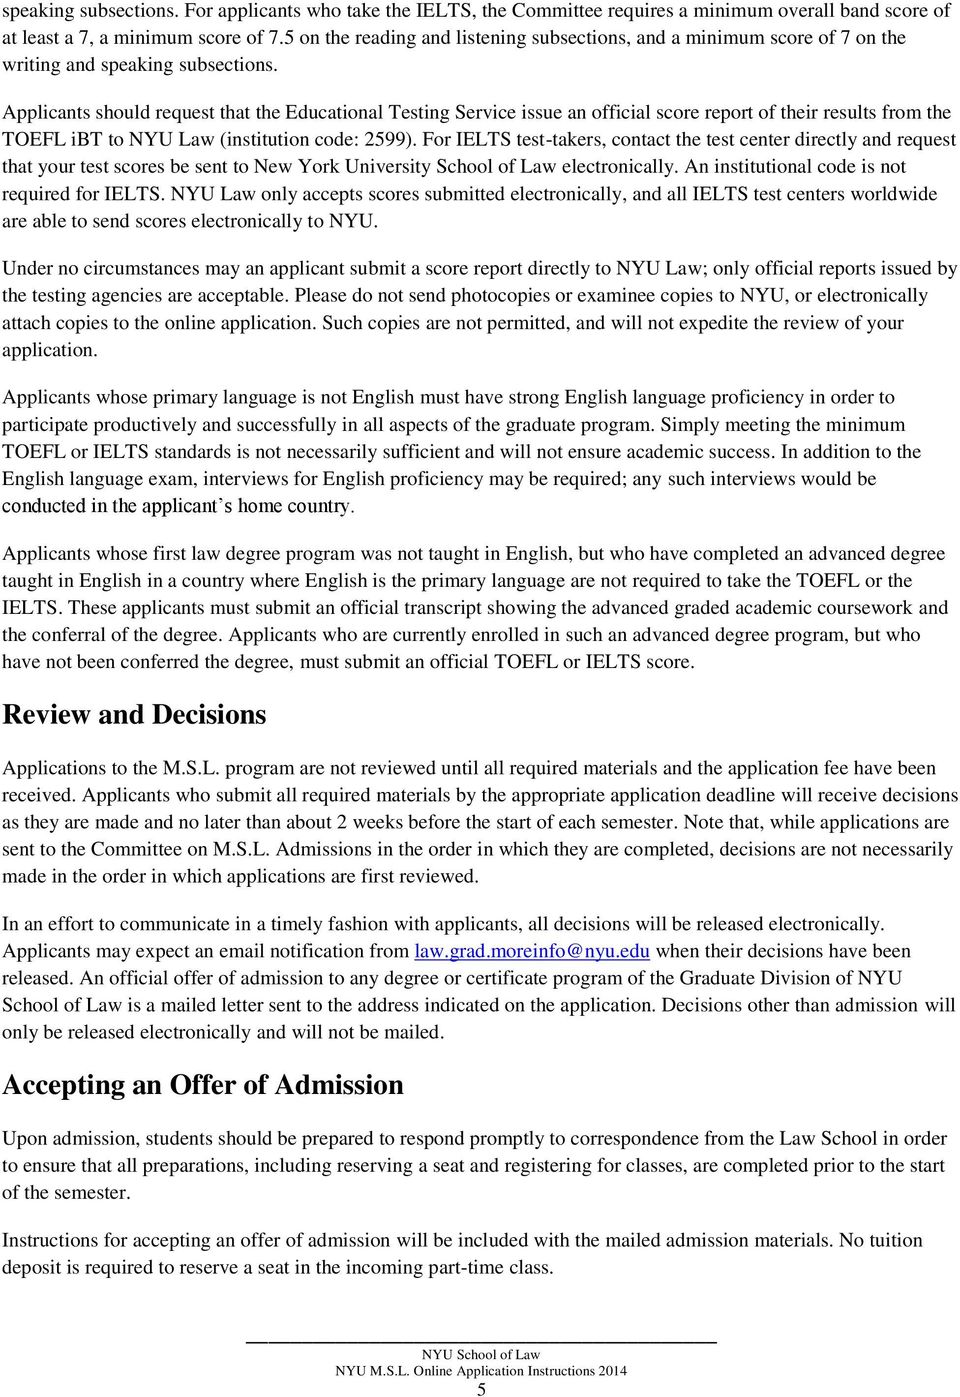 Applicants should request that the Educational Testing Service issue an official score report of their results from the TOEFL ibt to NYU Law (institution code: 2599).